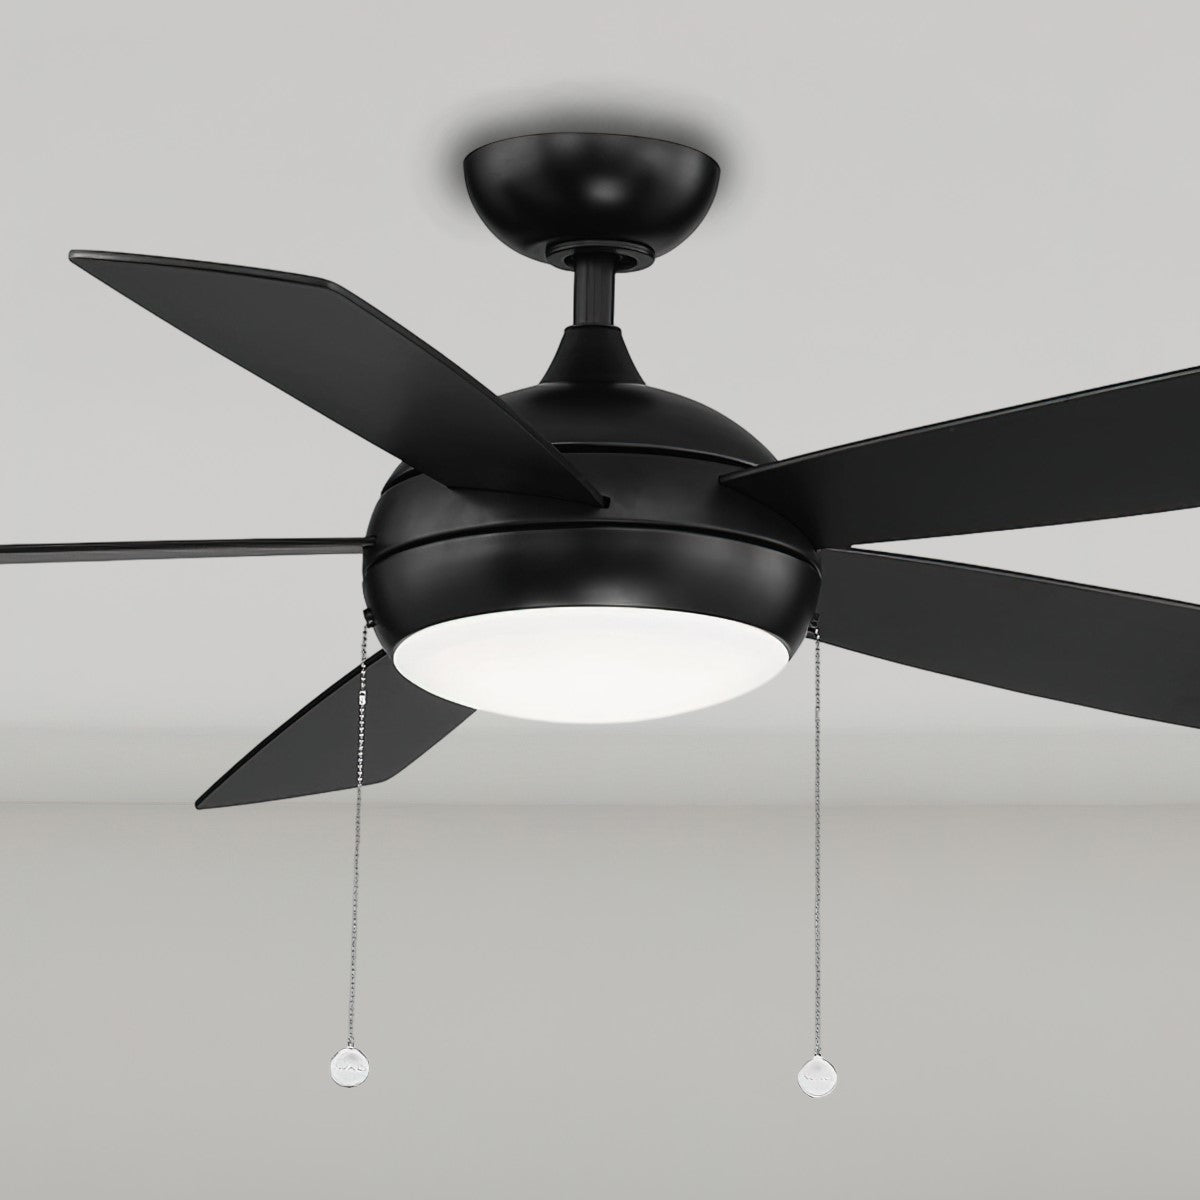 Disc II 52 Inch Indoor/Outdoor Ceiling Fan With Light And Pull Chain, DC Motor